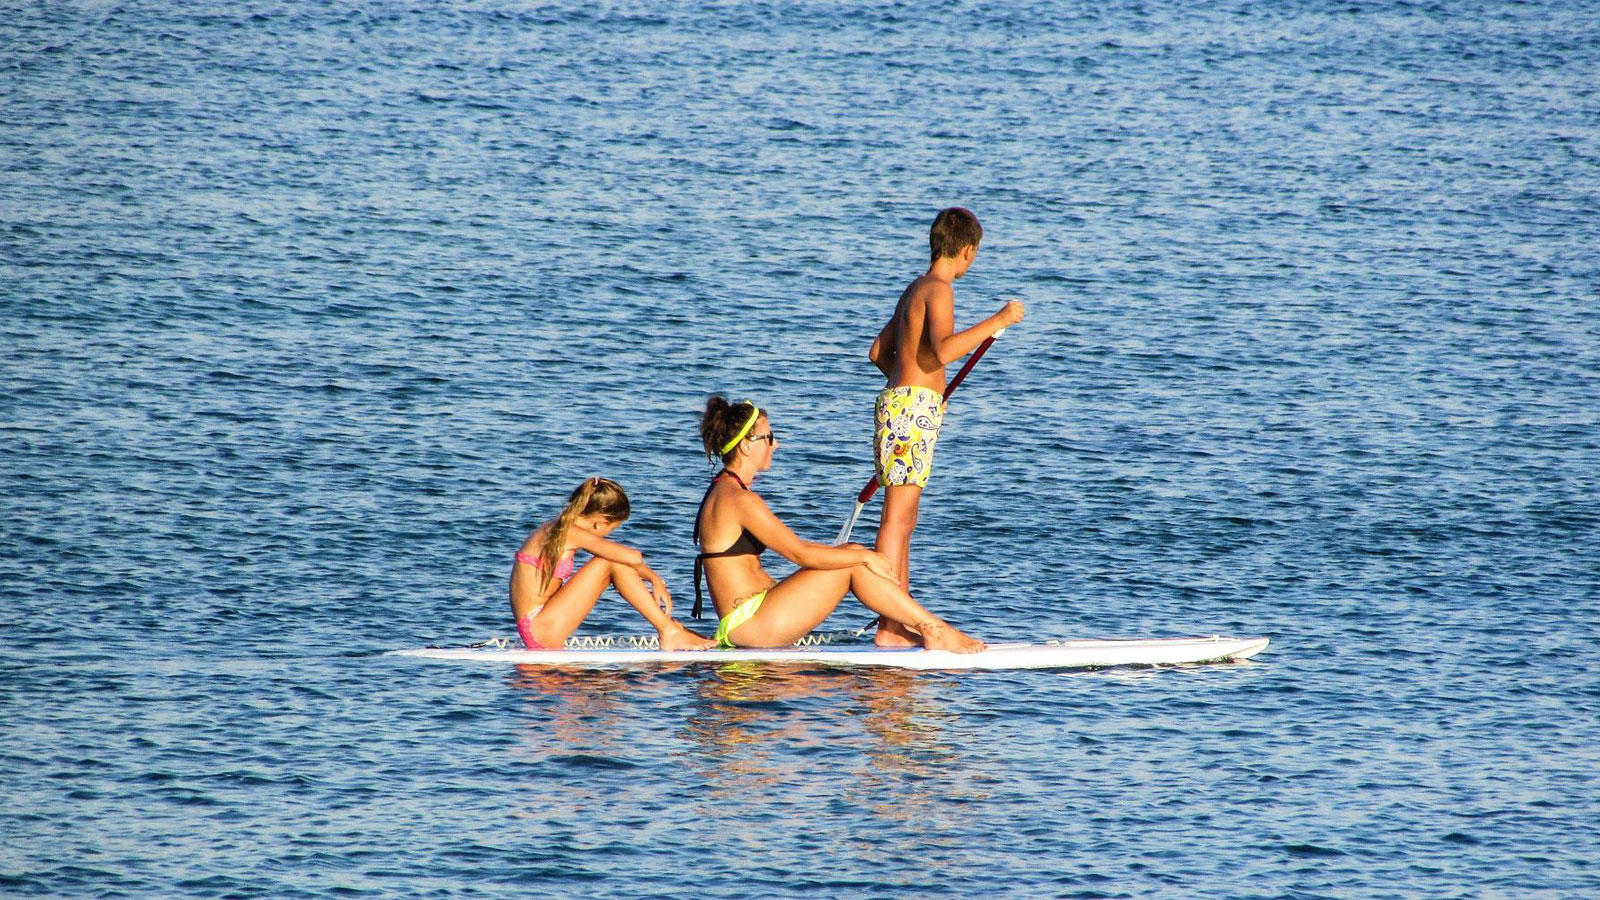 Things To Do In Phoenix - Tempe Town Lake - Paddleboard